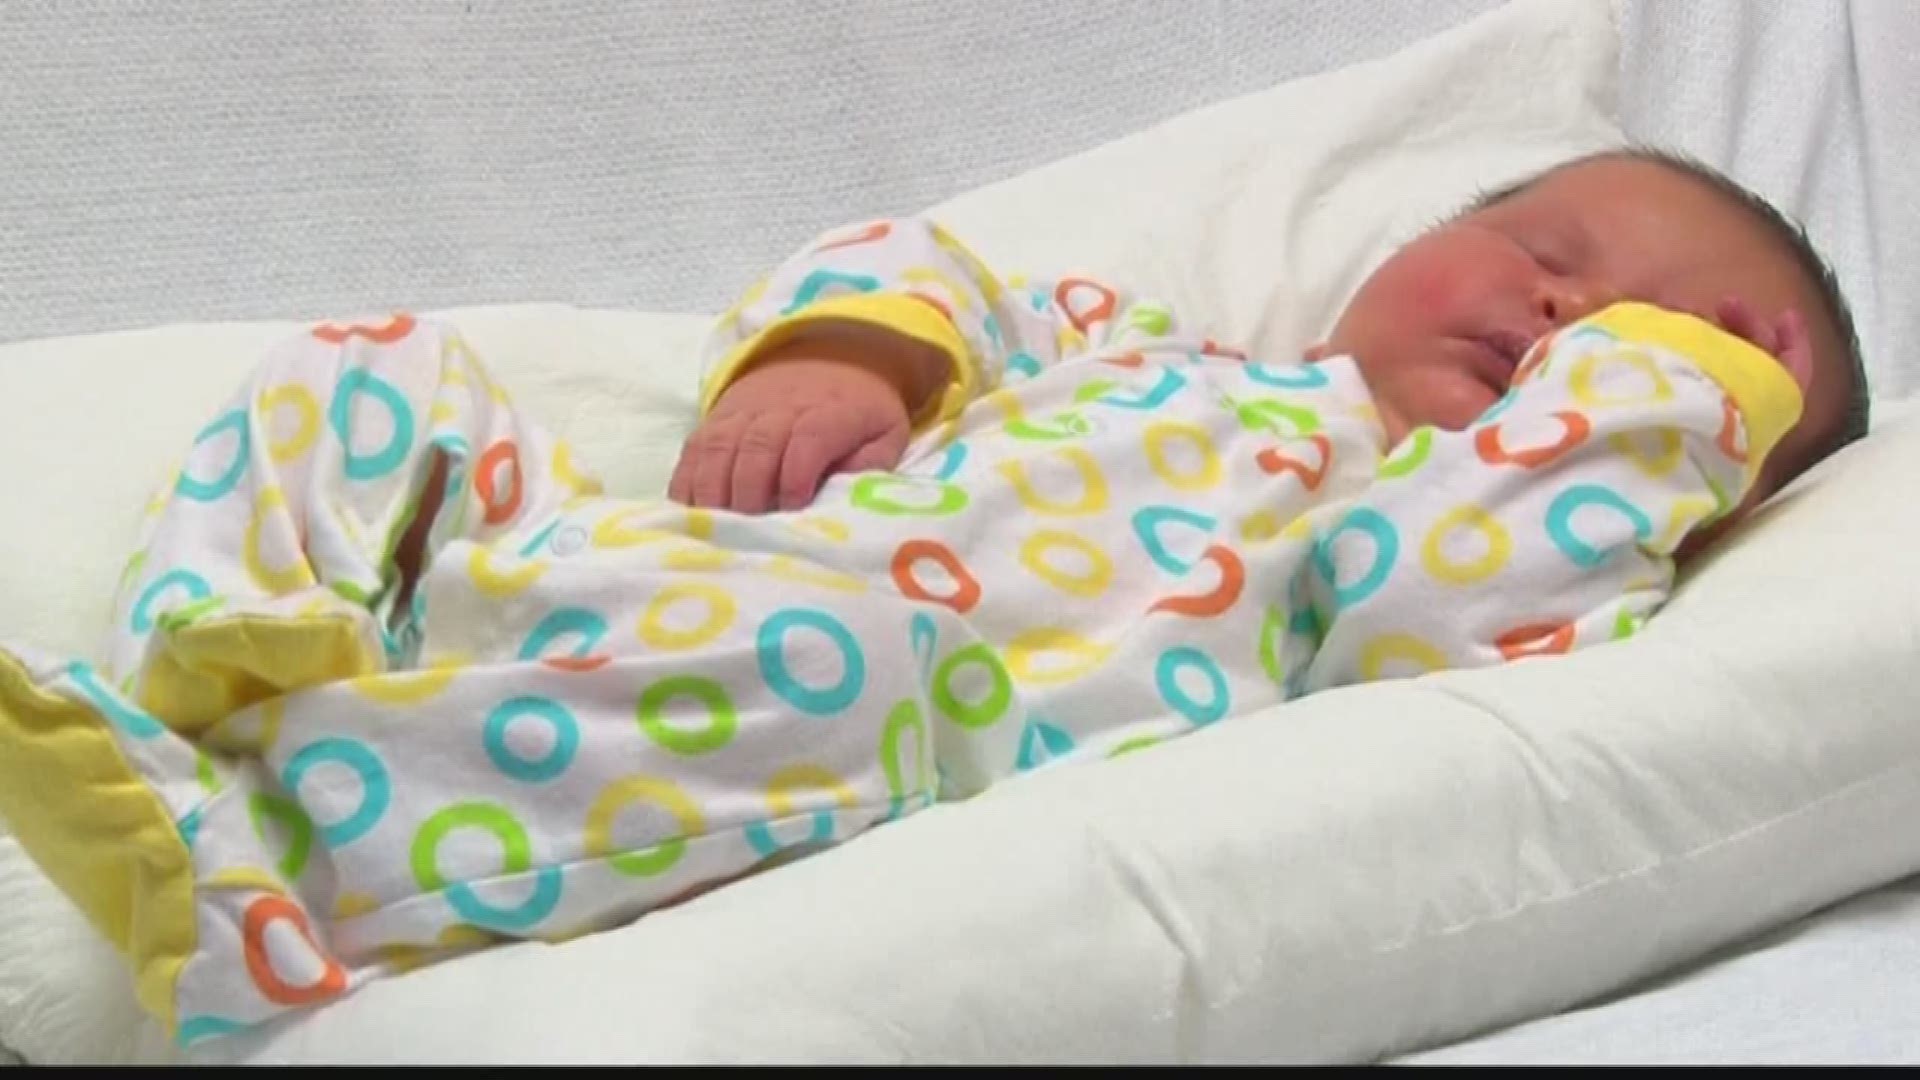 A Lexington County couple got a BIG surprise in the delivery room when their son came into the world at 14.4 pounds.